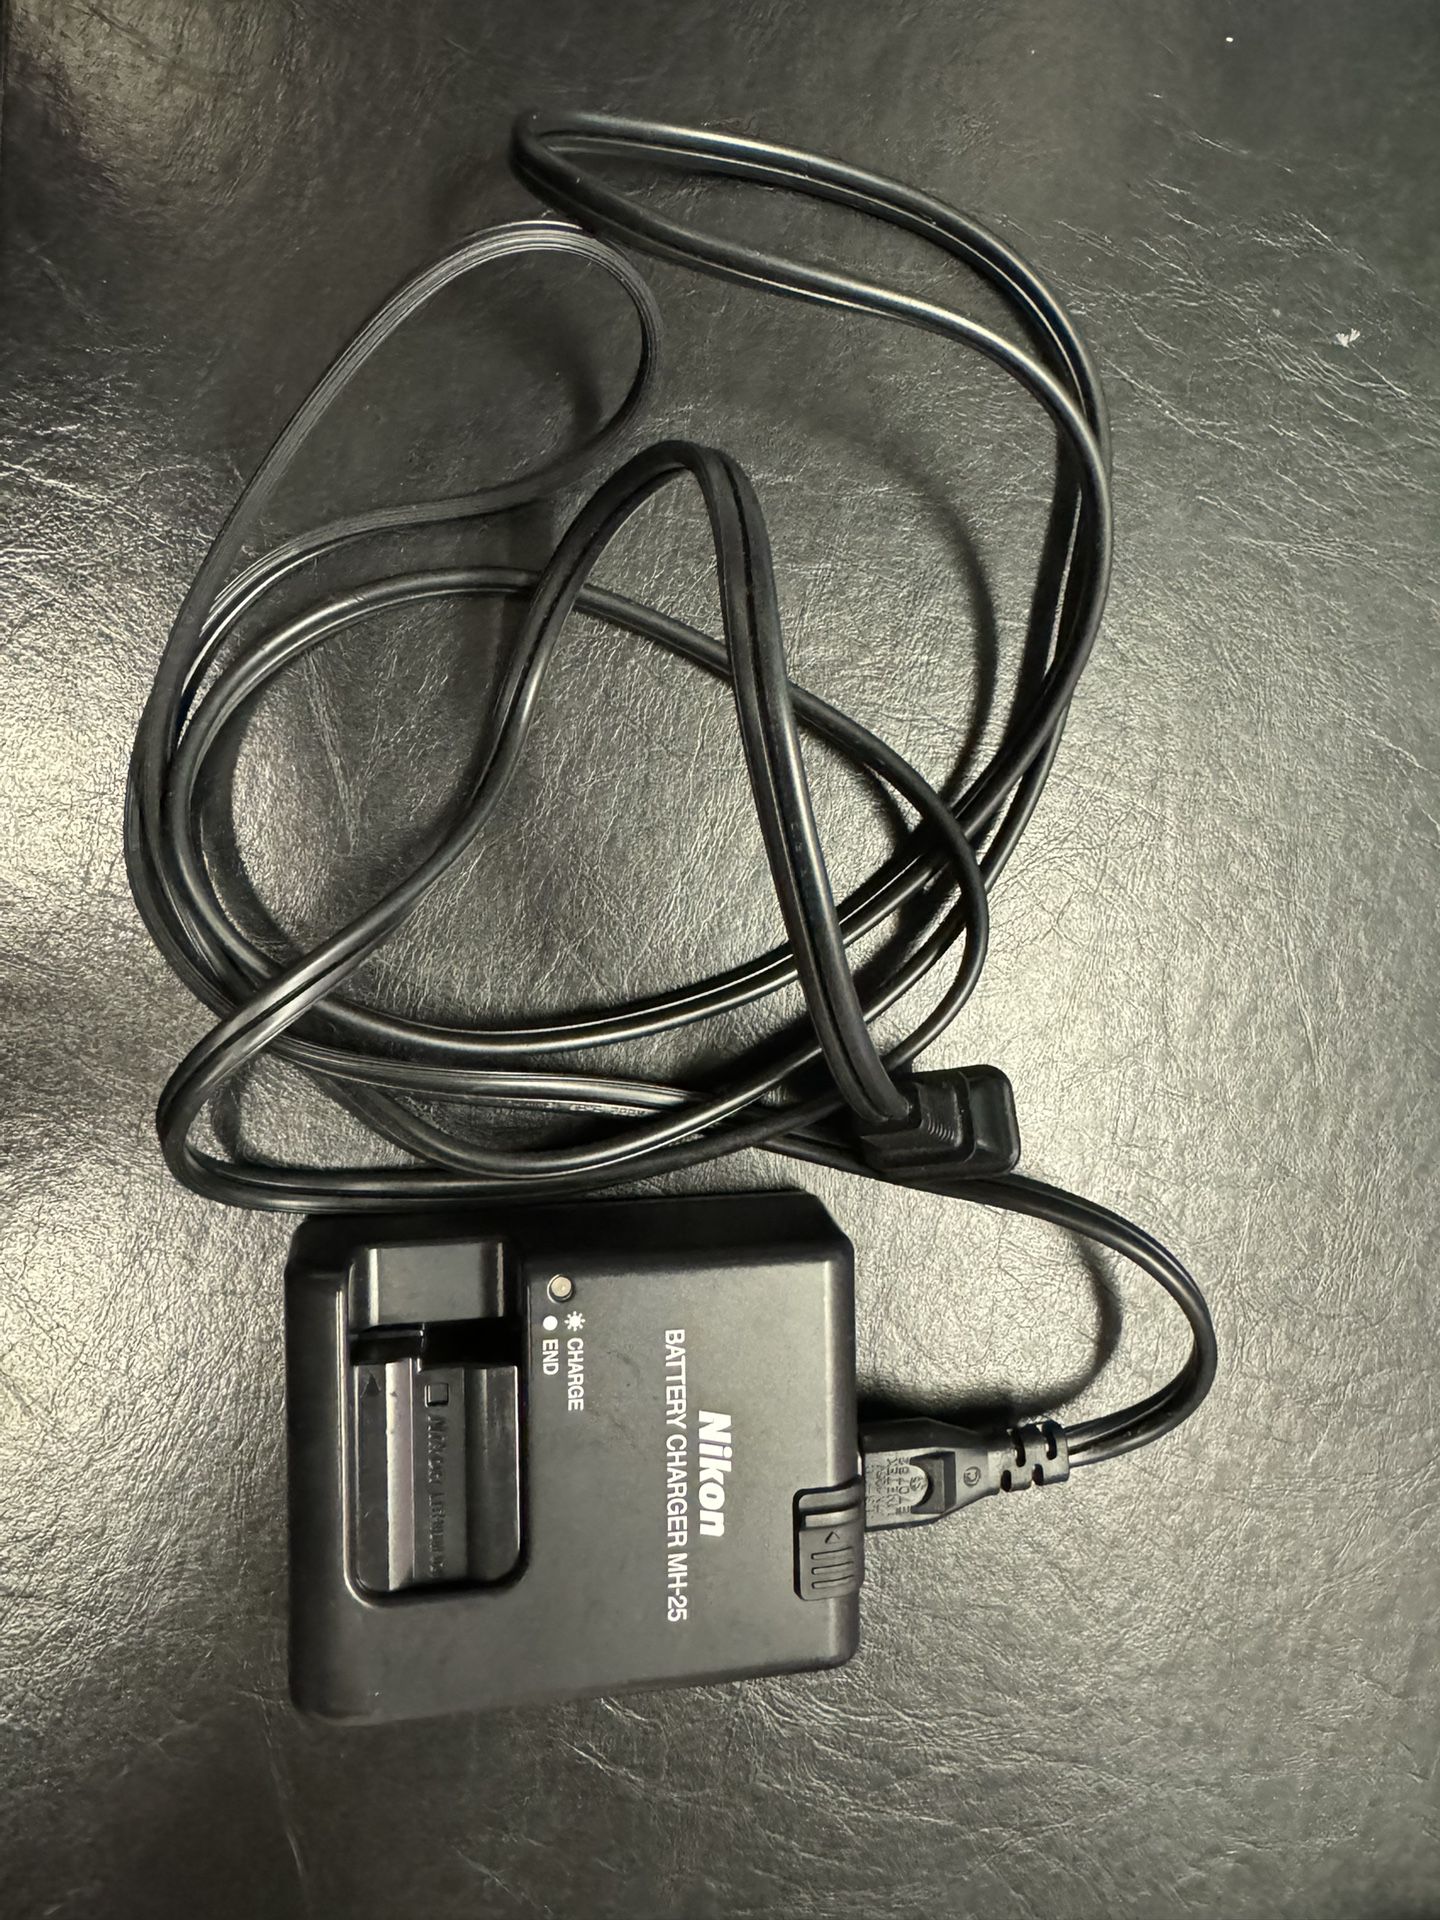 Nikon Quick Charger MH-25